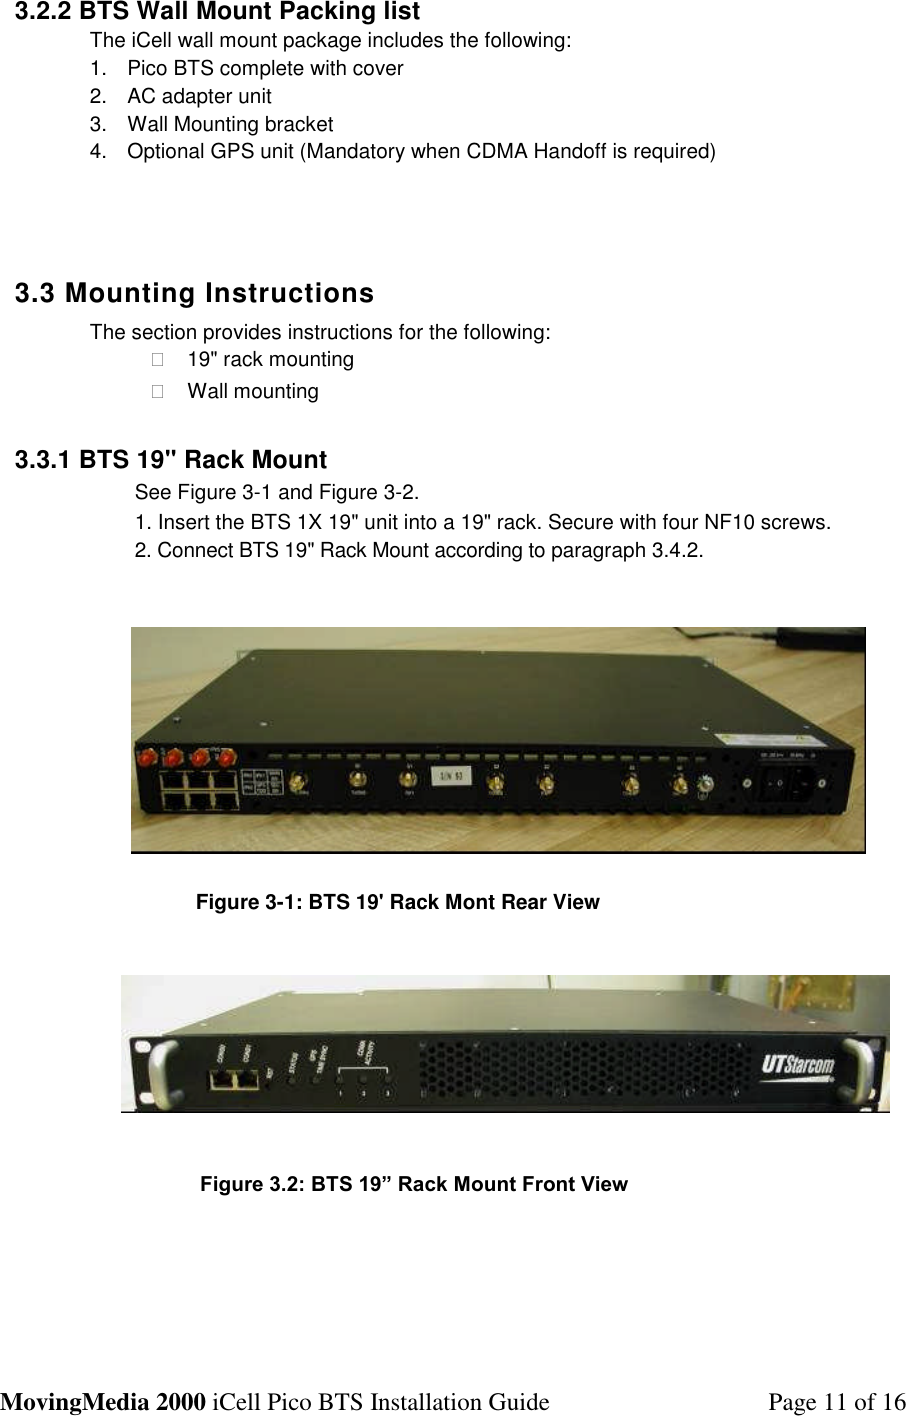 MovingMedia 2000 iCell Pico BTS Installation Guide Page 11 of 163.2.2 BTS Wall Mount Packing listThe iCell wall mount package includes the following:1. Pico BTS complete with cover2. AC adapter unit3. Wall Mounting bracket4. Optional GPS unit (Mandatory when CDMA Handoff is required)3.3 Mounting InstructionsThe section provides instructions for the following:�19&quot; rack mounting�Wall mounting3.3.1 BTS 19&quot; Rack MountSee Figure 3-1 and Figure 3-2.1. Insert the BTS 1X 19&quot; unit into a 19&quot; rack. Secure with four NF10 screws.2. Connect BTS 19&quot; Rack Mount according to paragraph 3.4.2.Figure 3-1: BTS 19&apos; Rack Mont Rear ViewFigure 3.2: BTS 19” Rack Mount Front View